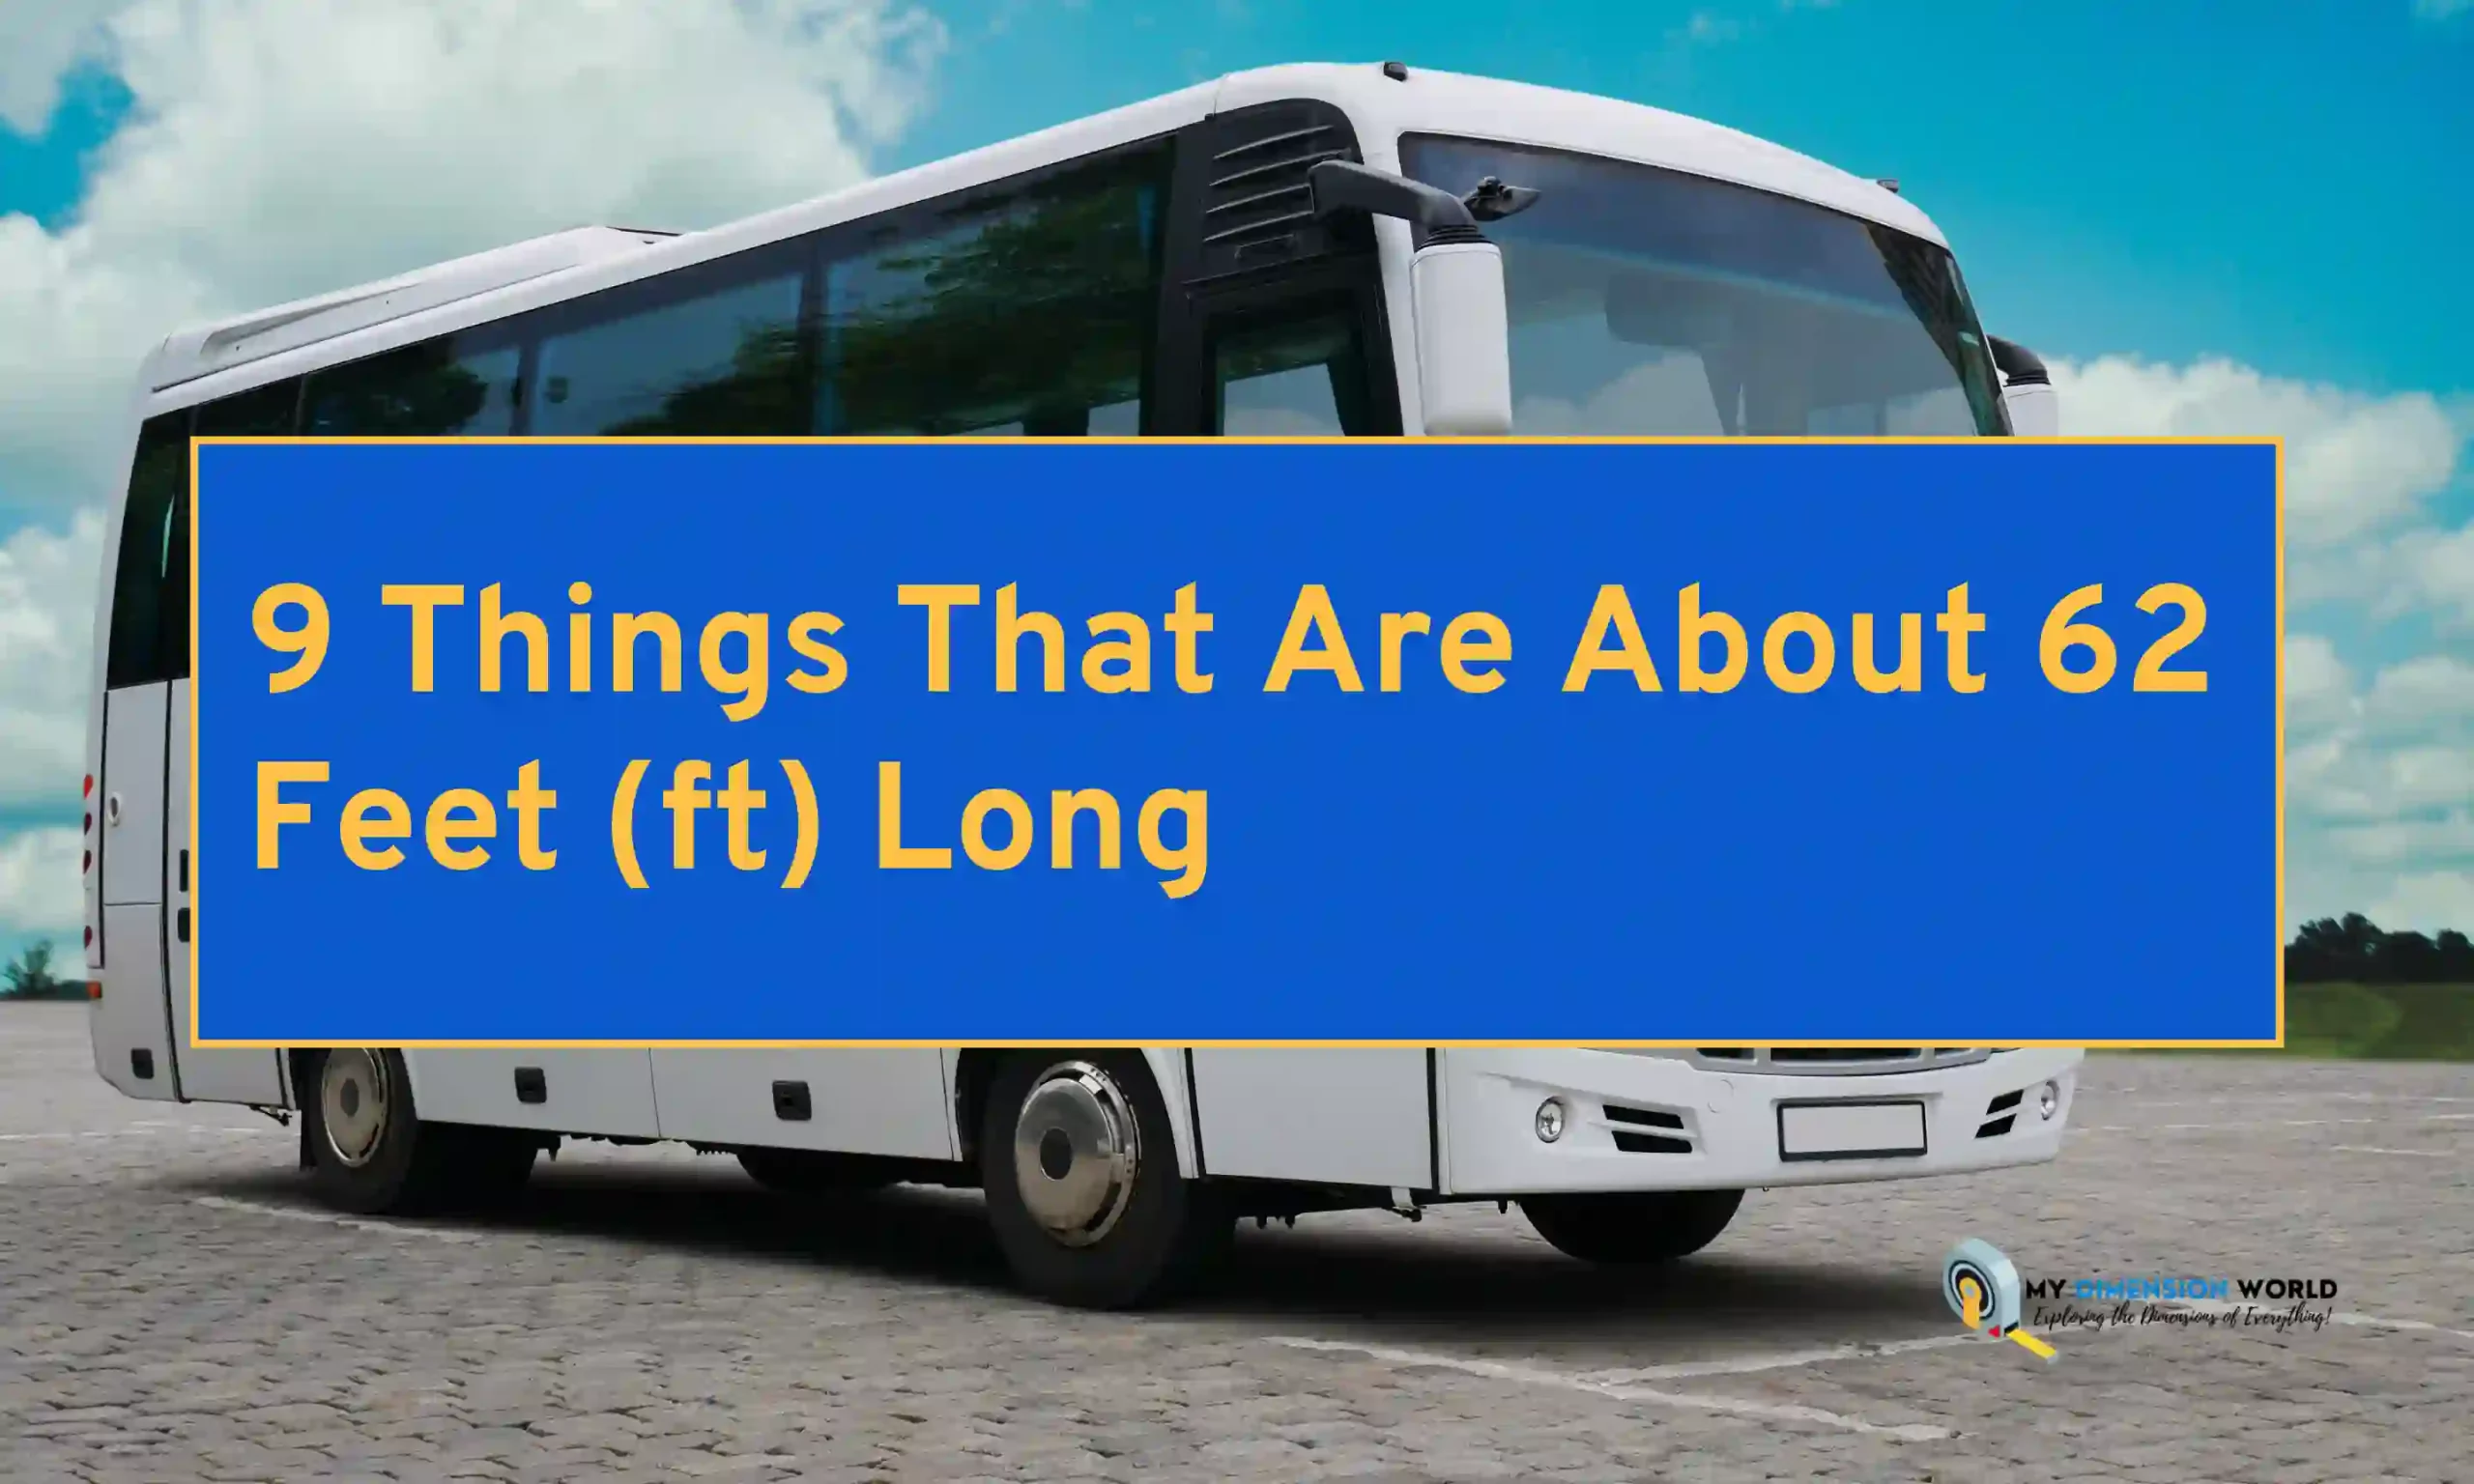 9 Things That Are About 62 Feet (ft) Long